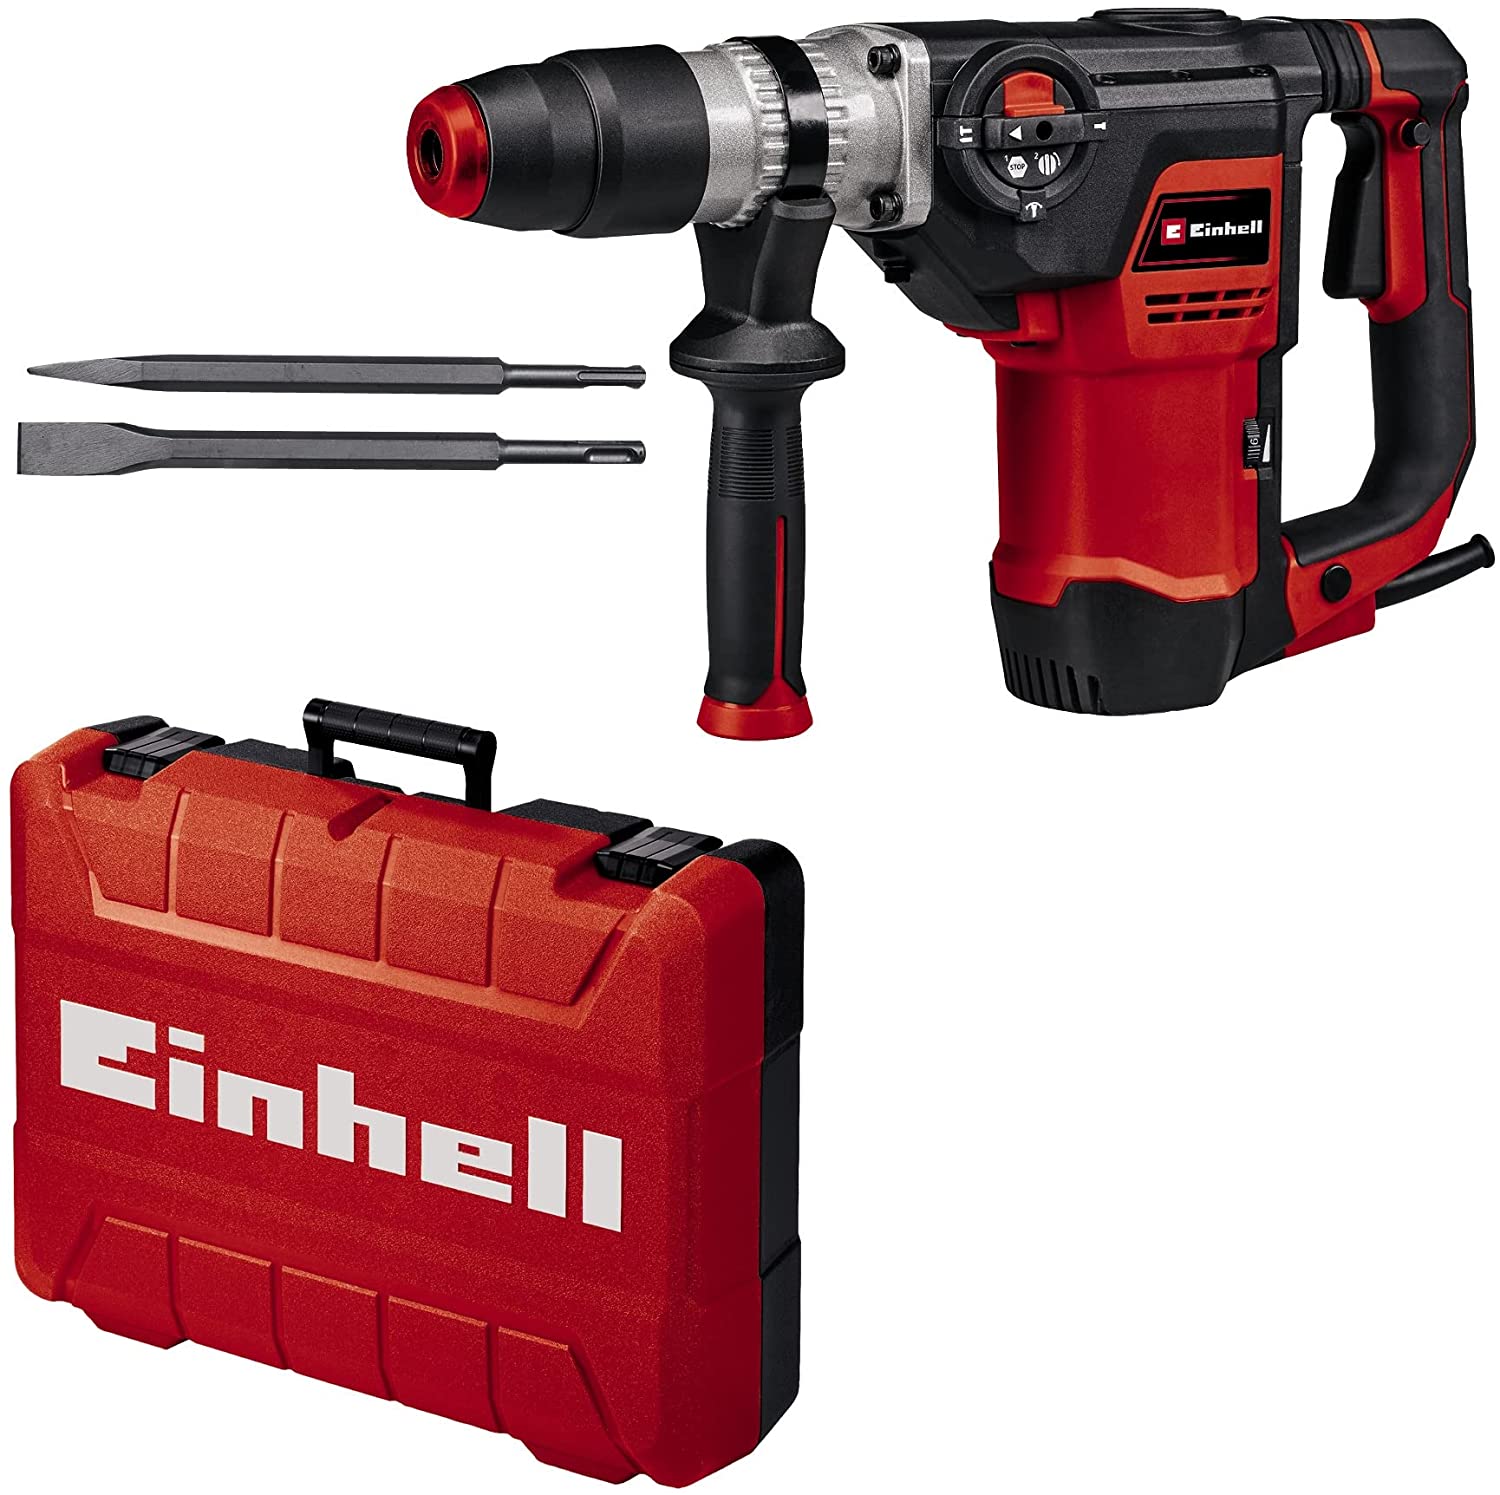 Einhell Cordless Hammer Drill HEROCCO 36/28, 36V (2x18V) (red/black, without battery and charger)